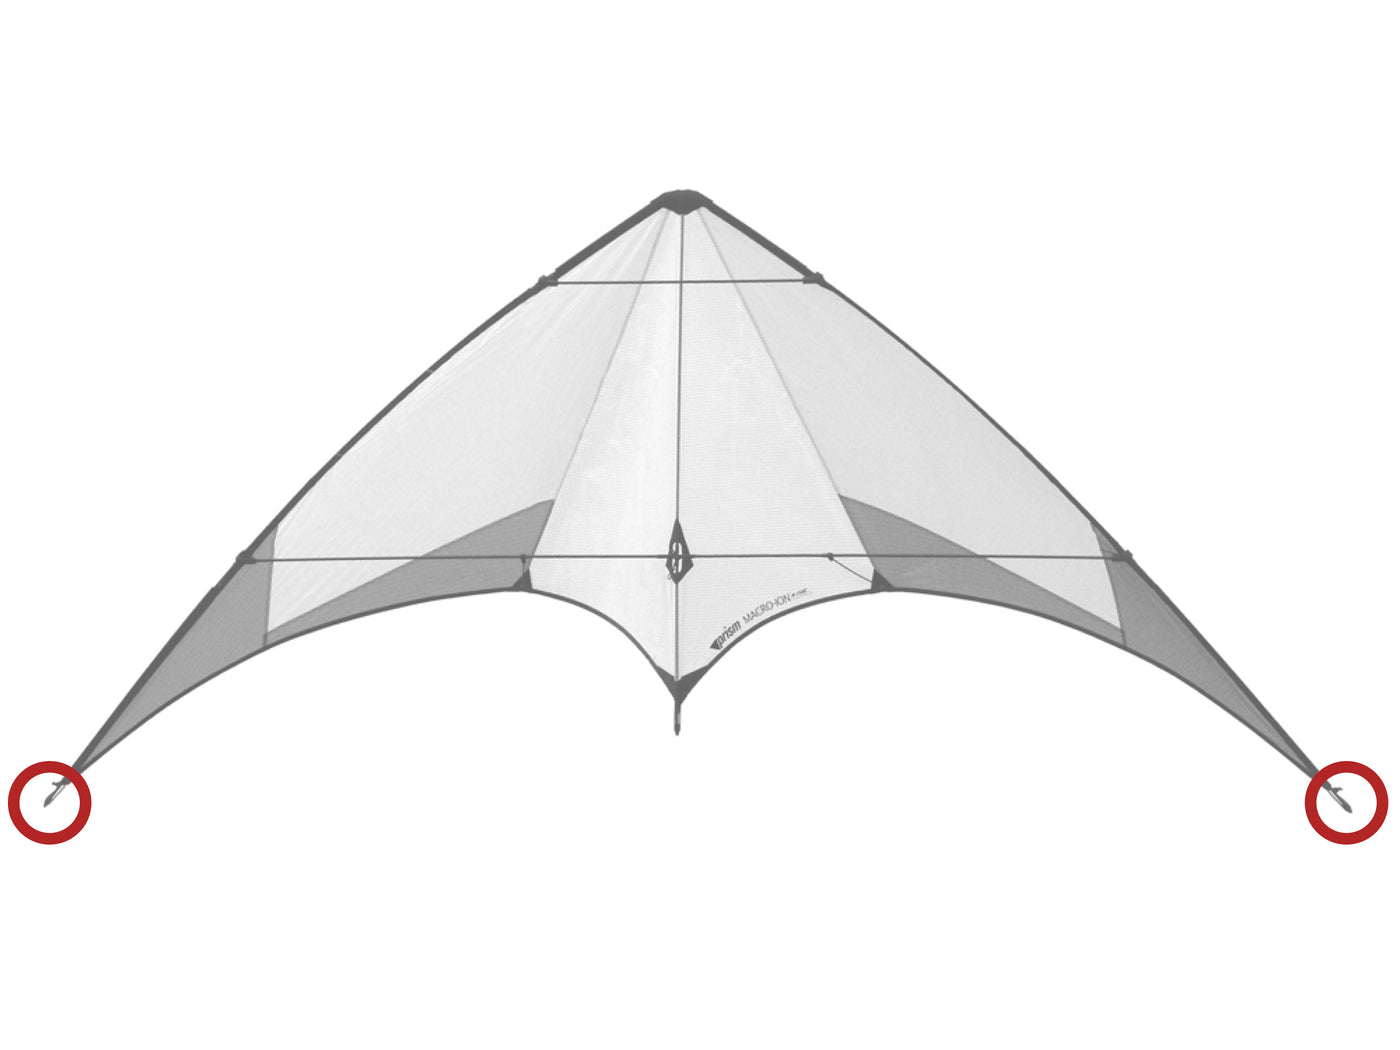 Diagram showing location of the Macro Ion Wingtip Nocks on the kite.